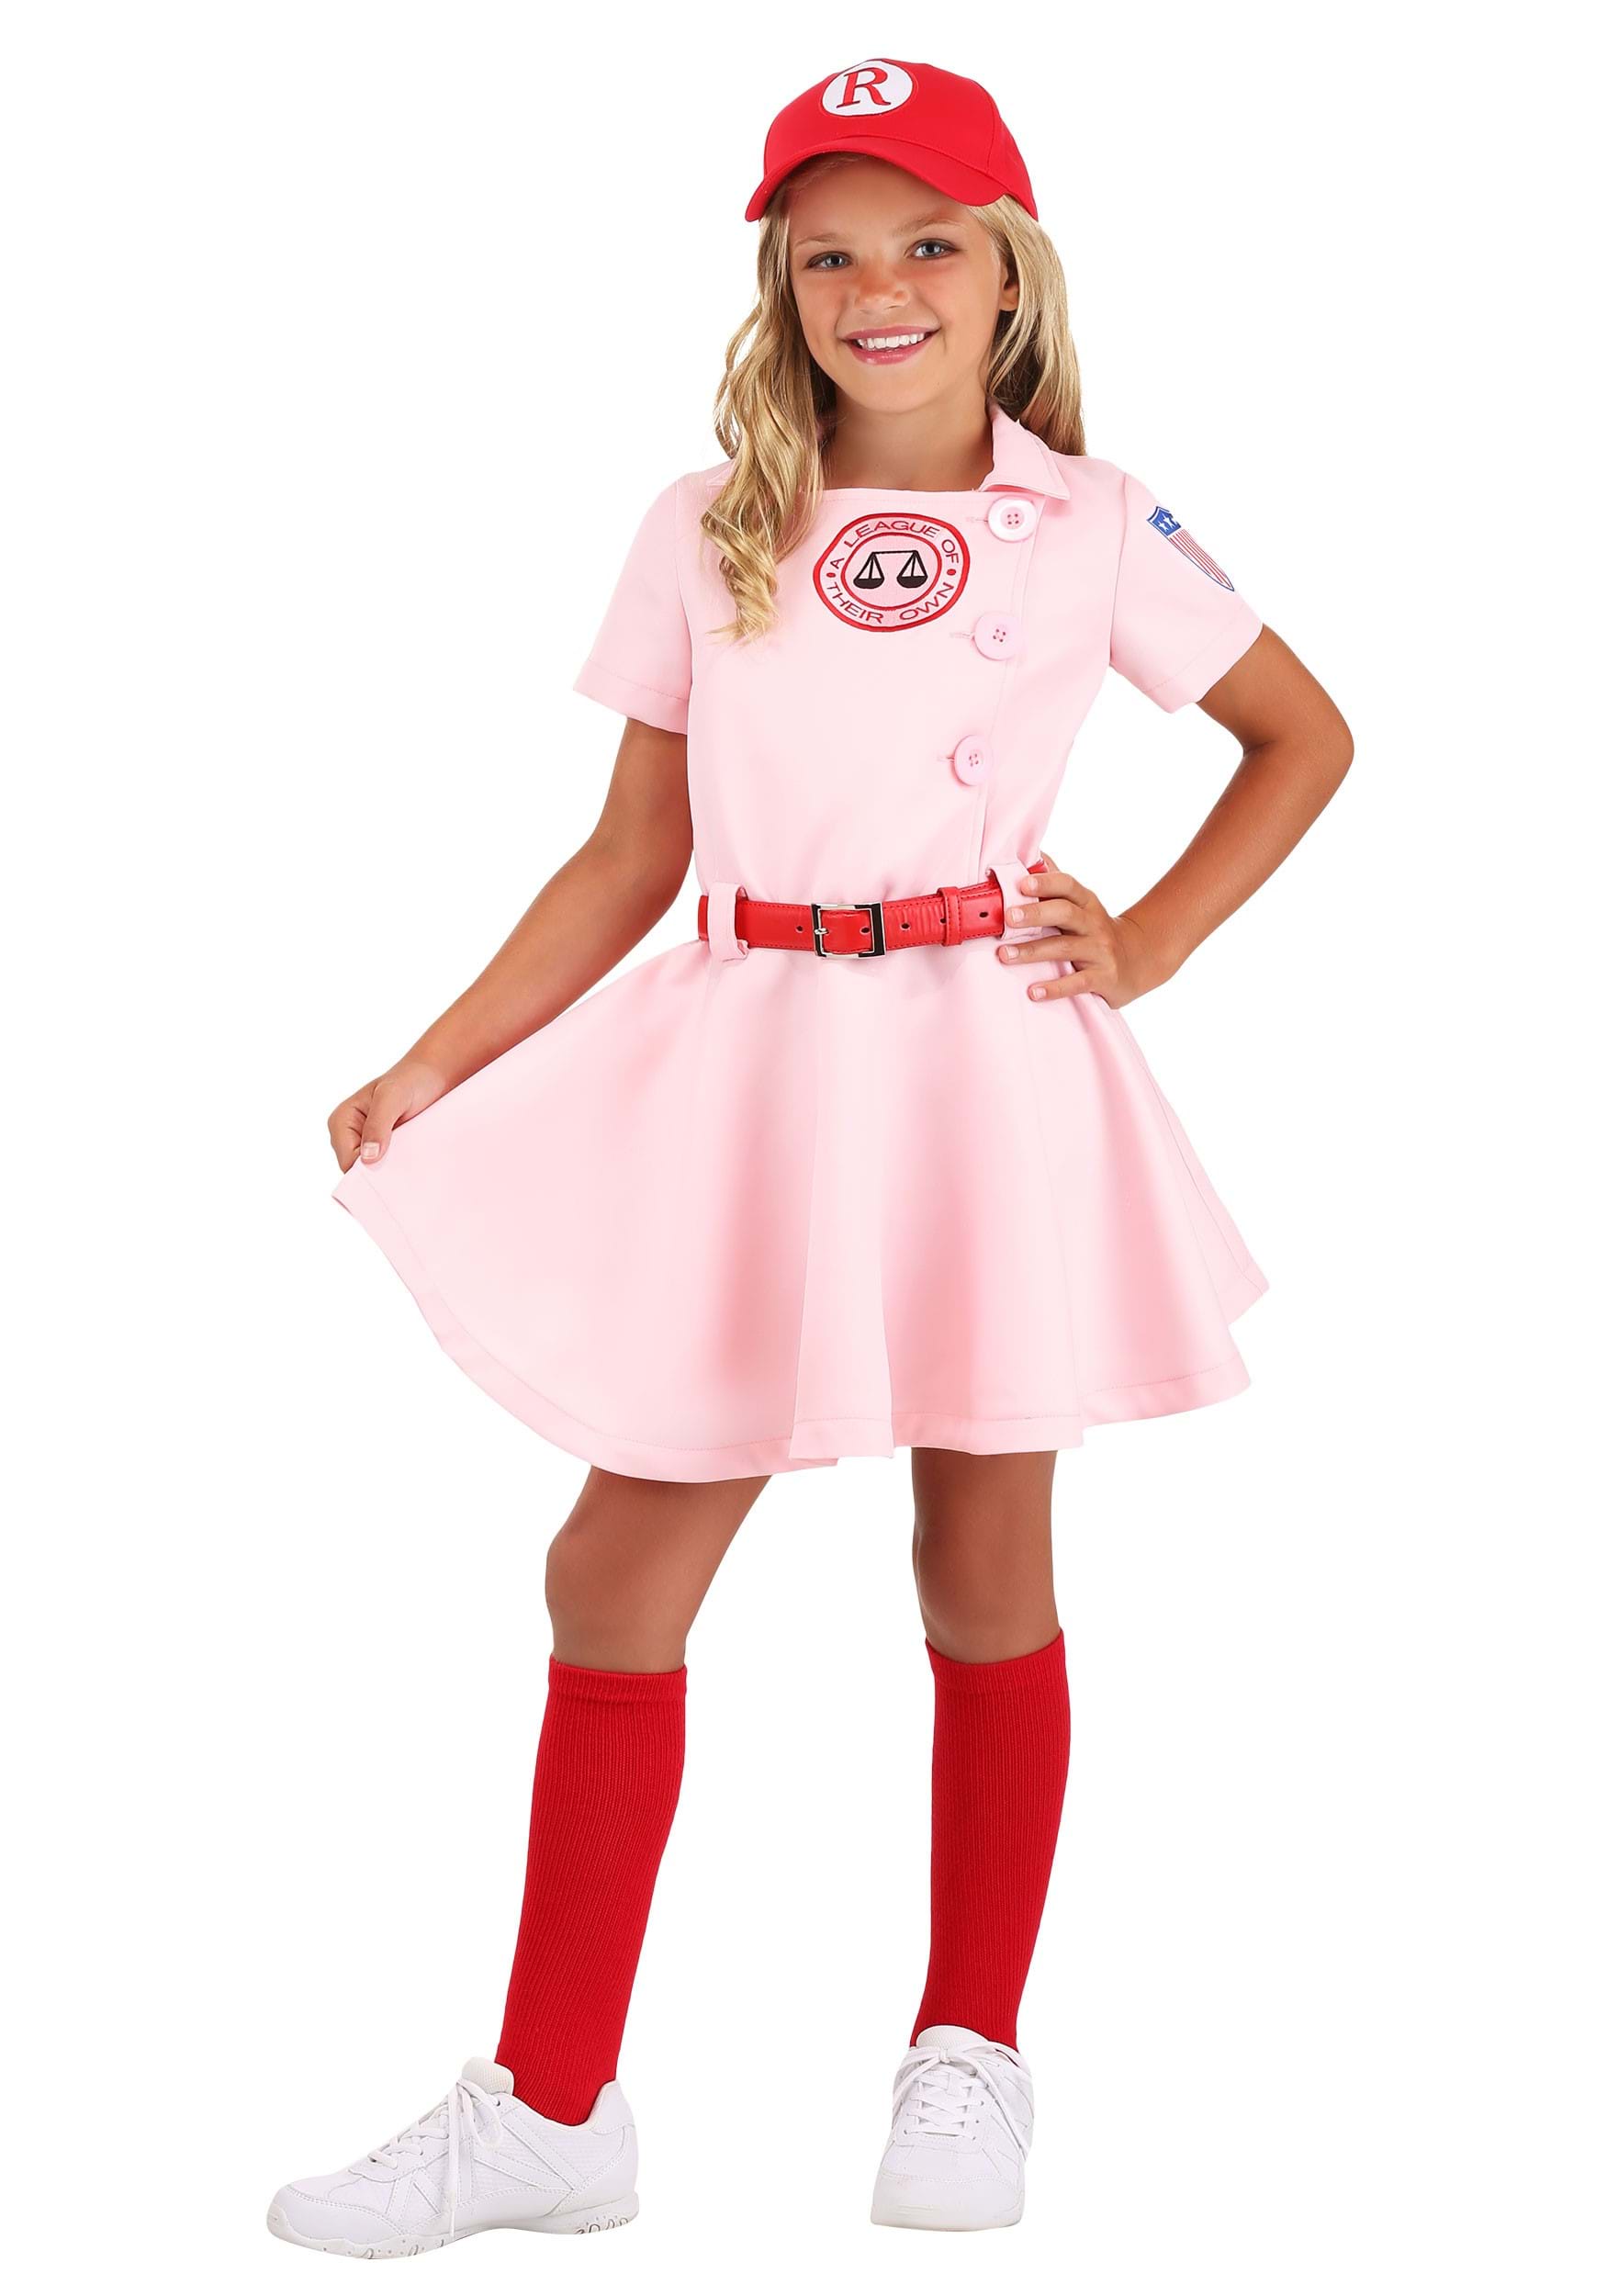 Image of FUN Costumes League of Their Own Luxury Child Dottie Costume for Girls